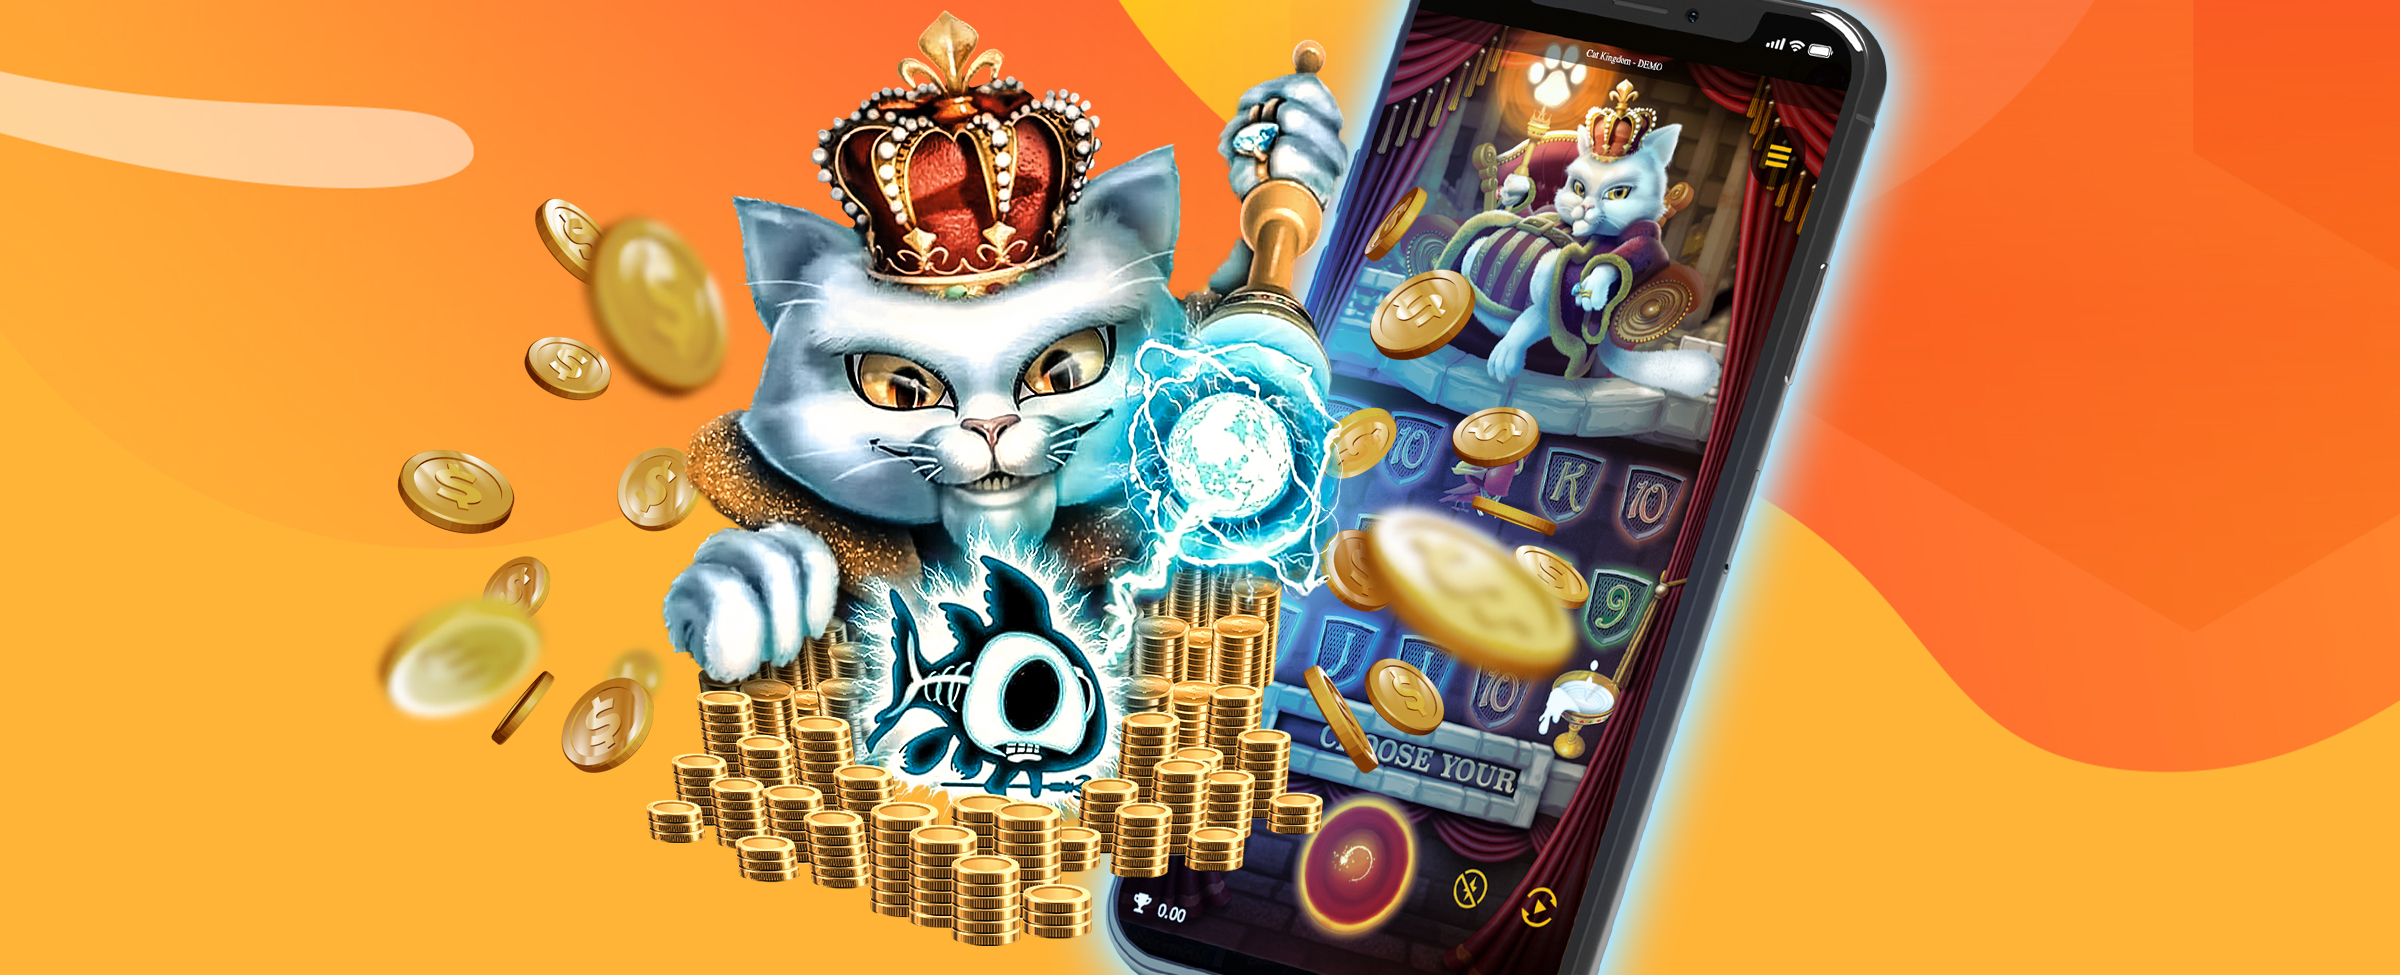 King Cat wielding his scepter, beside the online slots game Cat Kingdom displayed on a mobile phone.